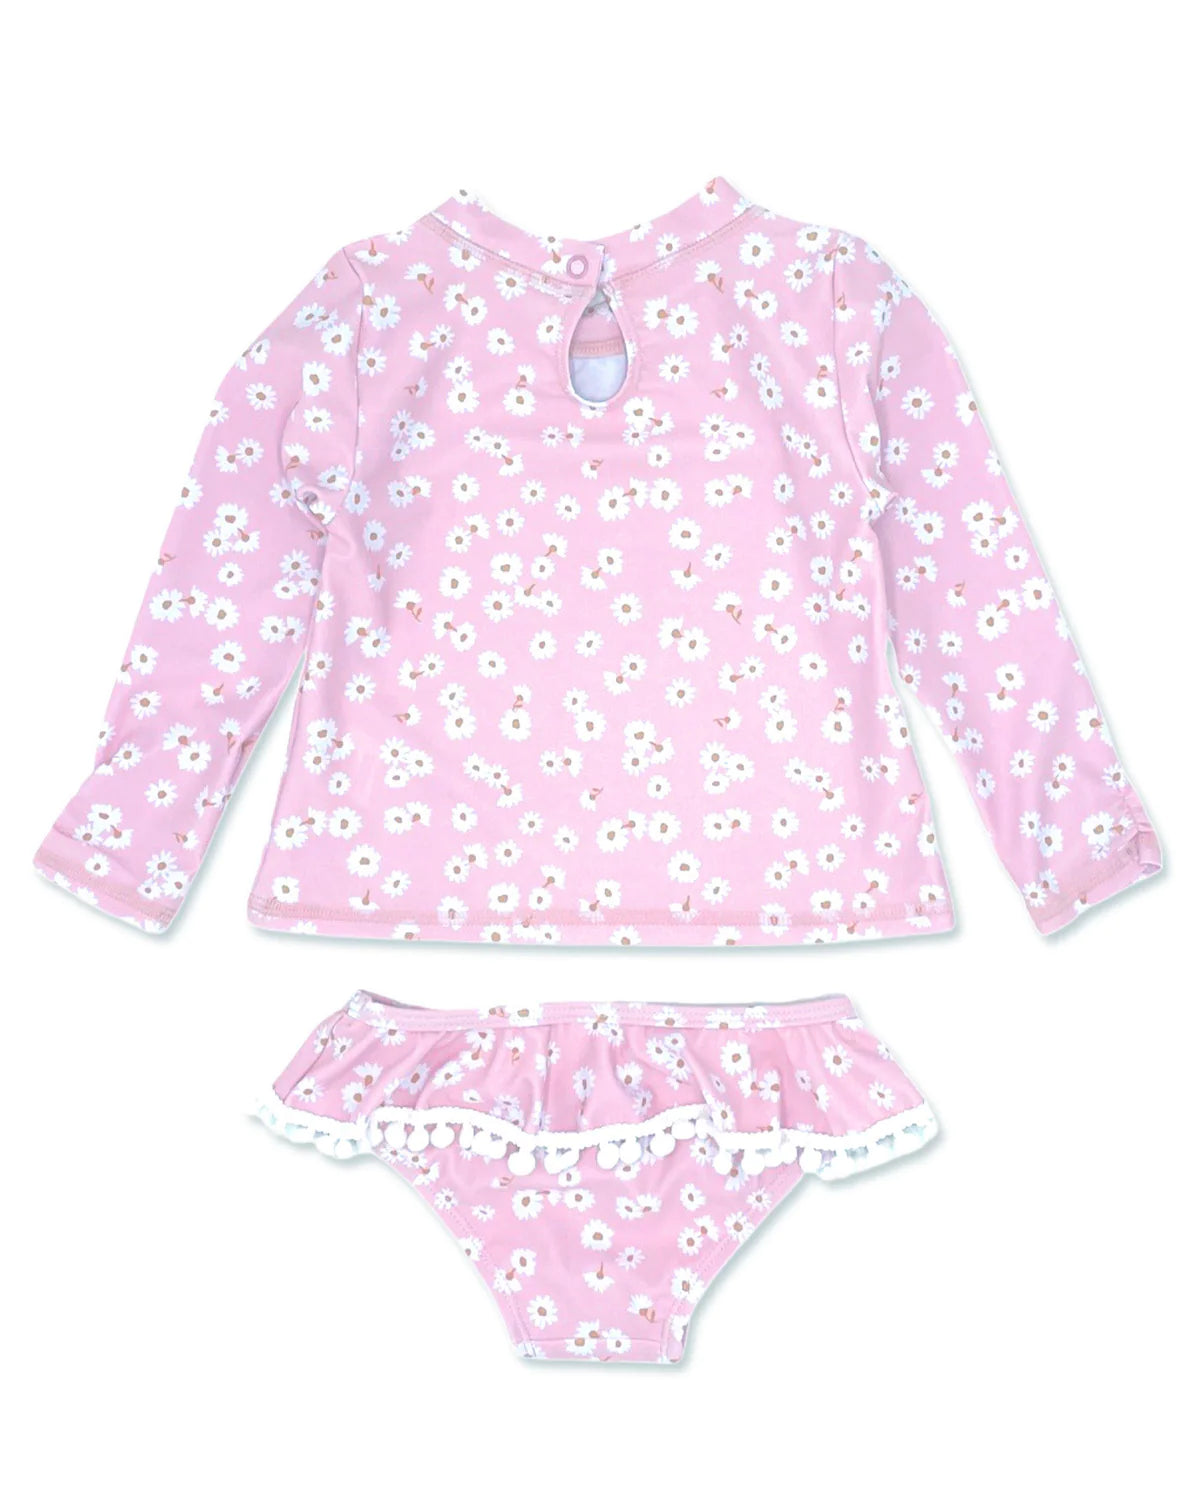 Sandy Toes Long Sleeve Set in Daisy  - Doodlebug's Children's Boutique